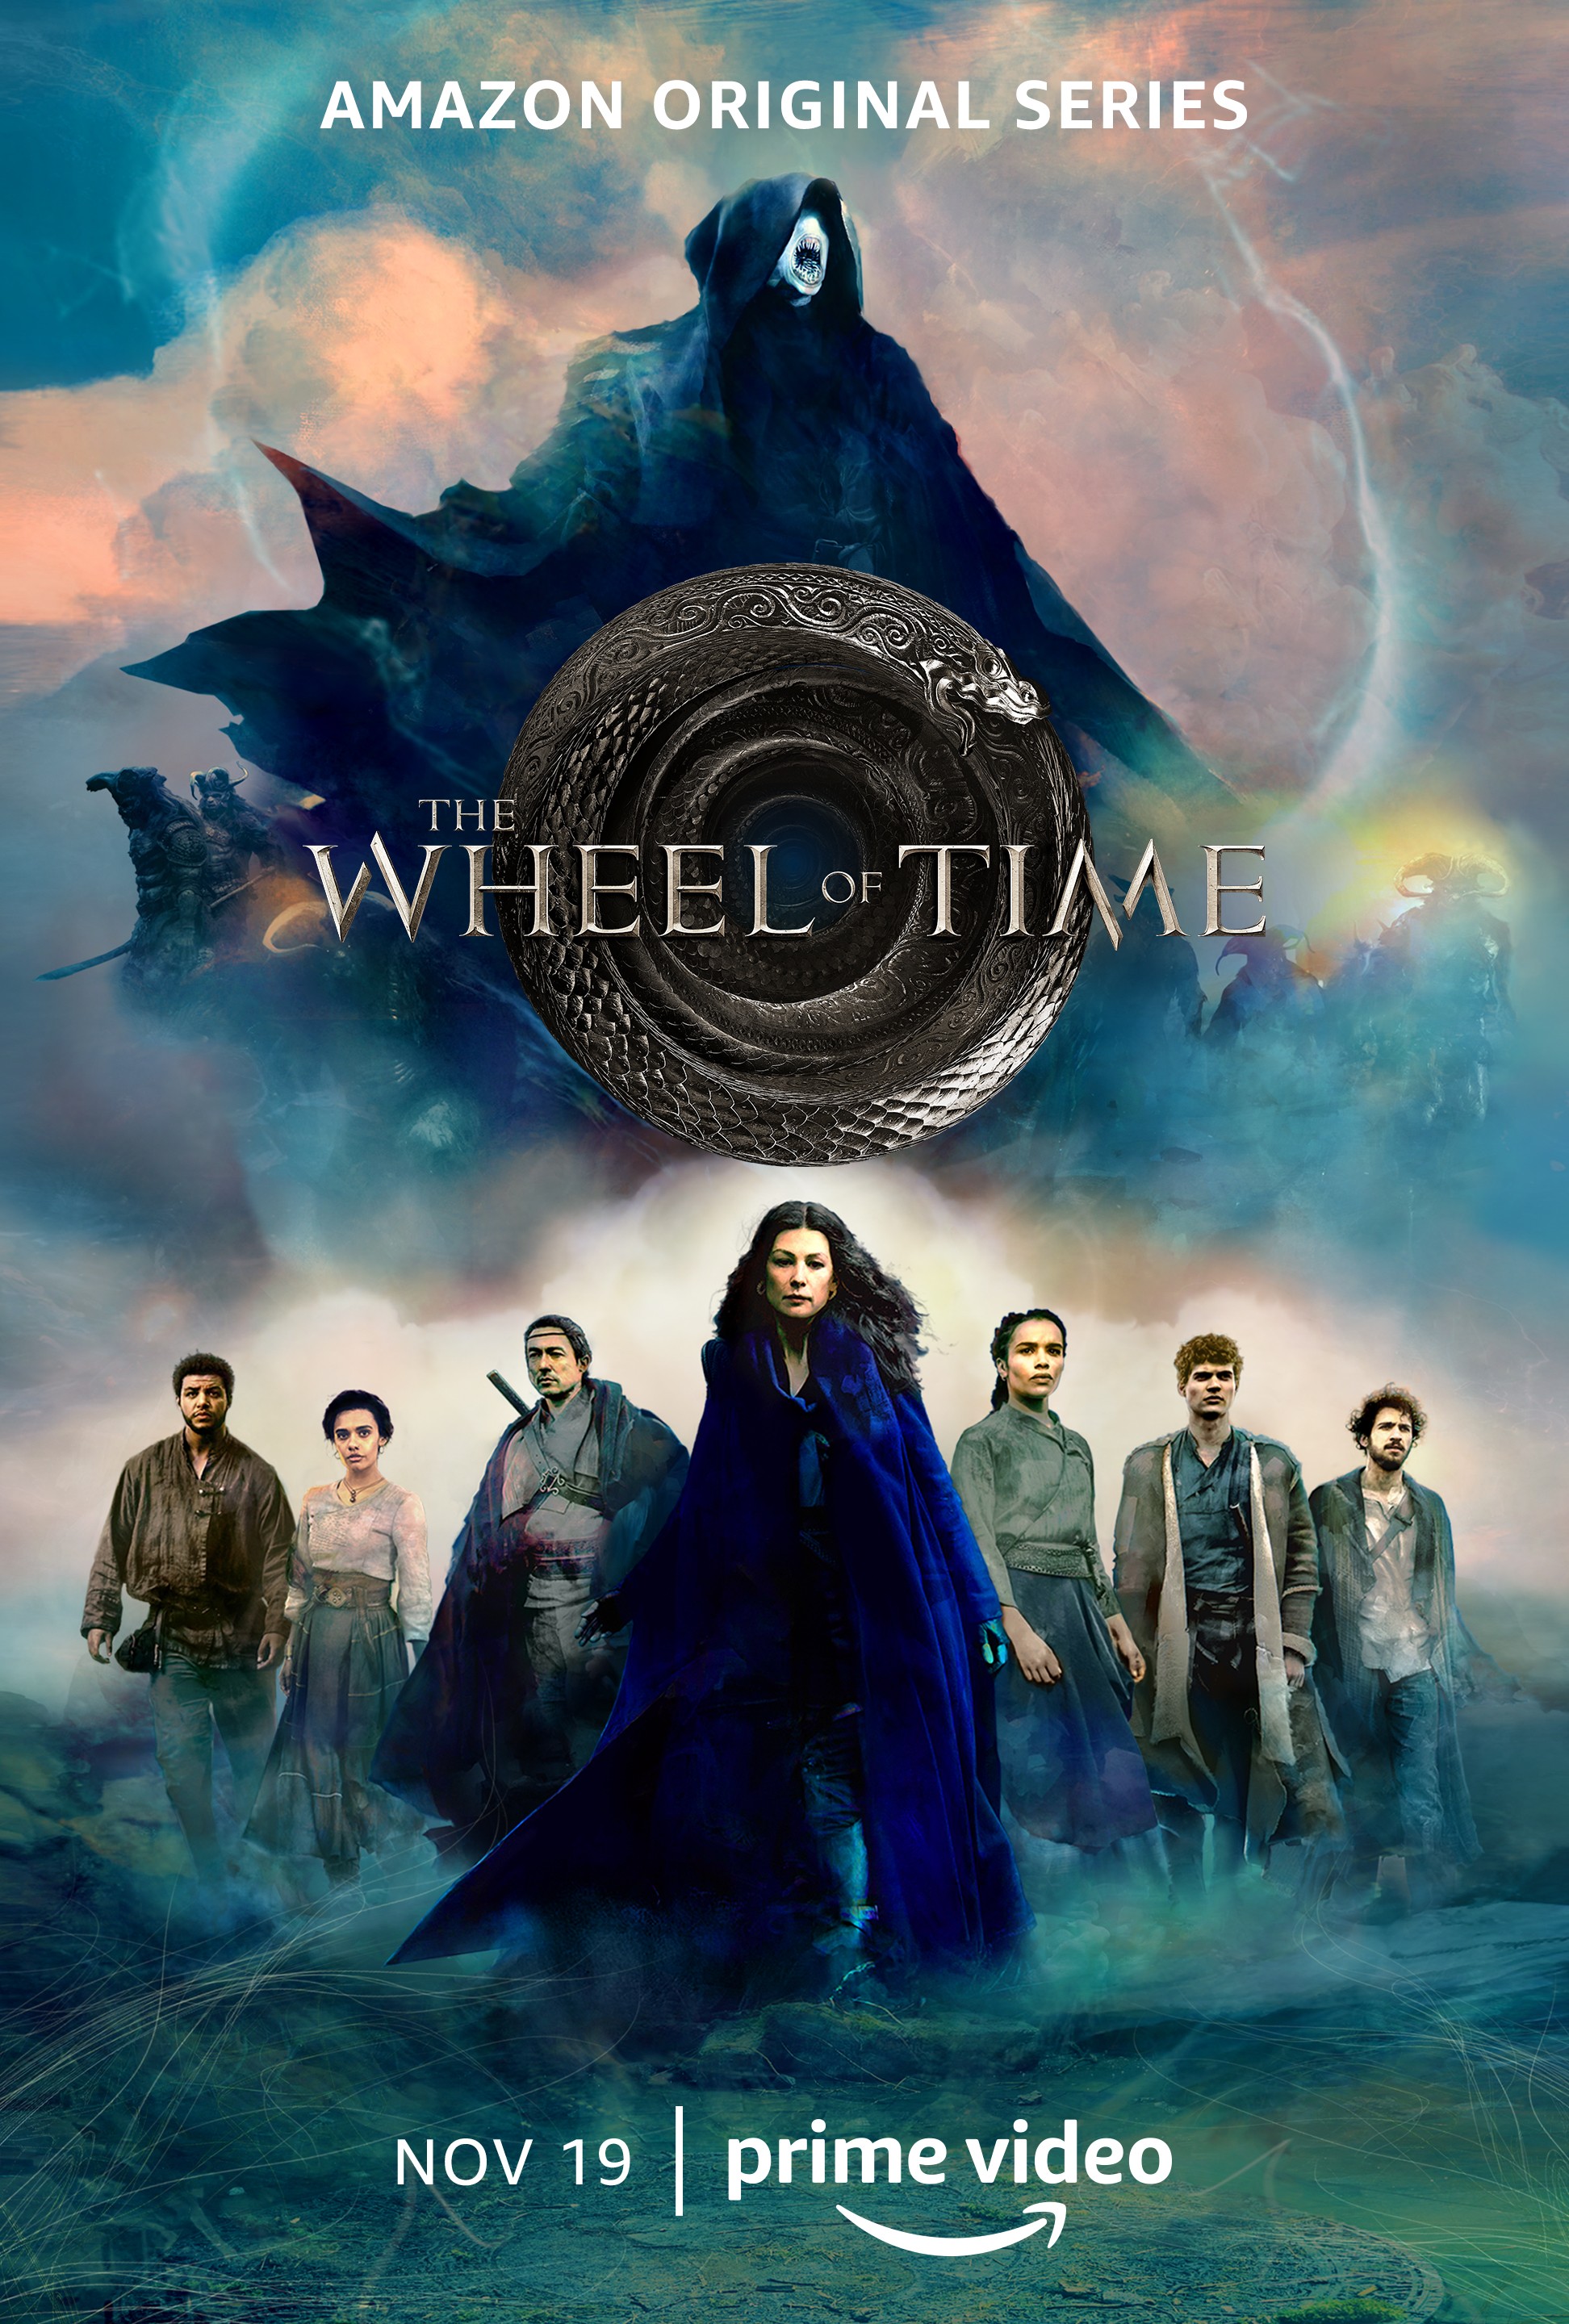 The Wheel of Time cast, Full list of actors and characters